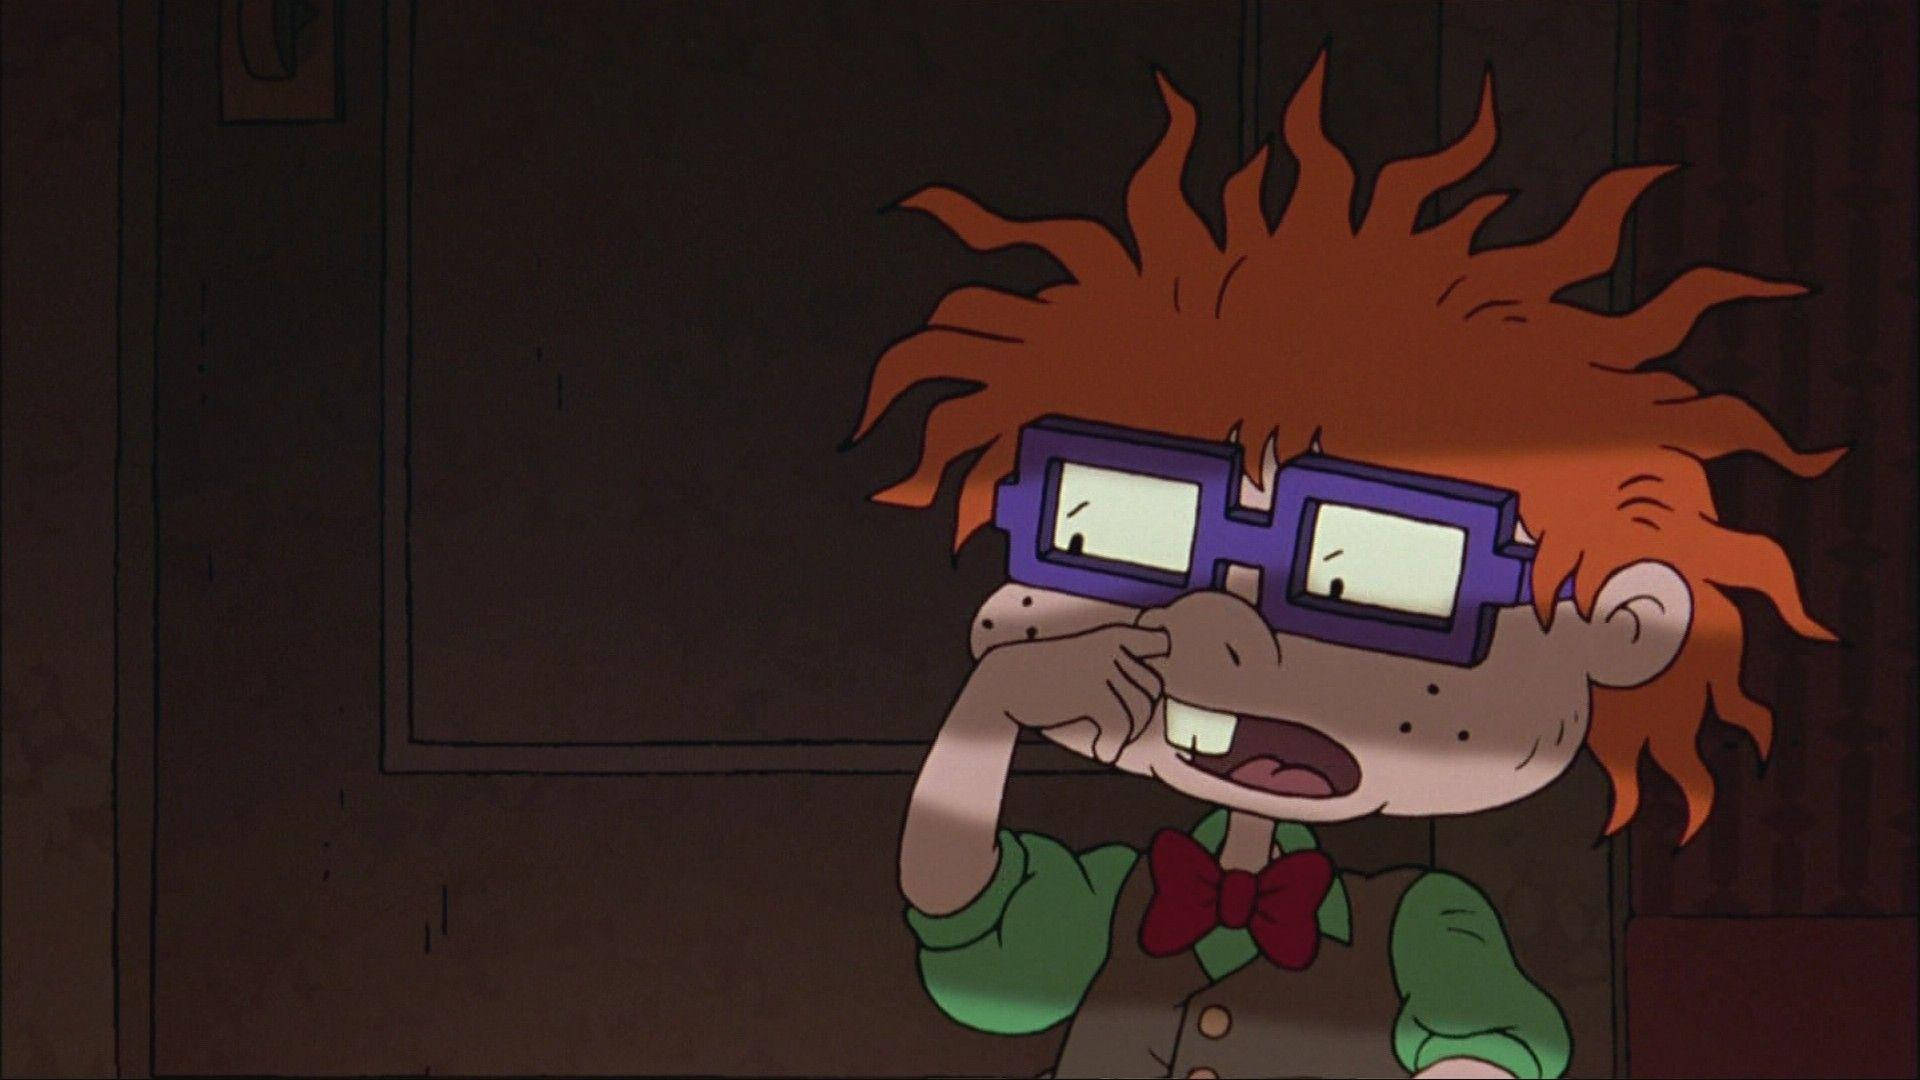 Join The Rugrats Gang For Some Awesome Adventures!